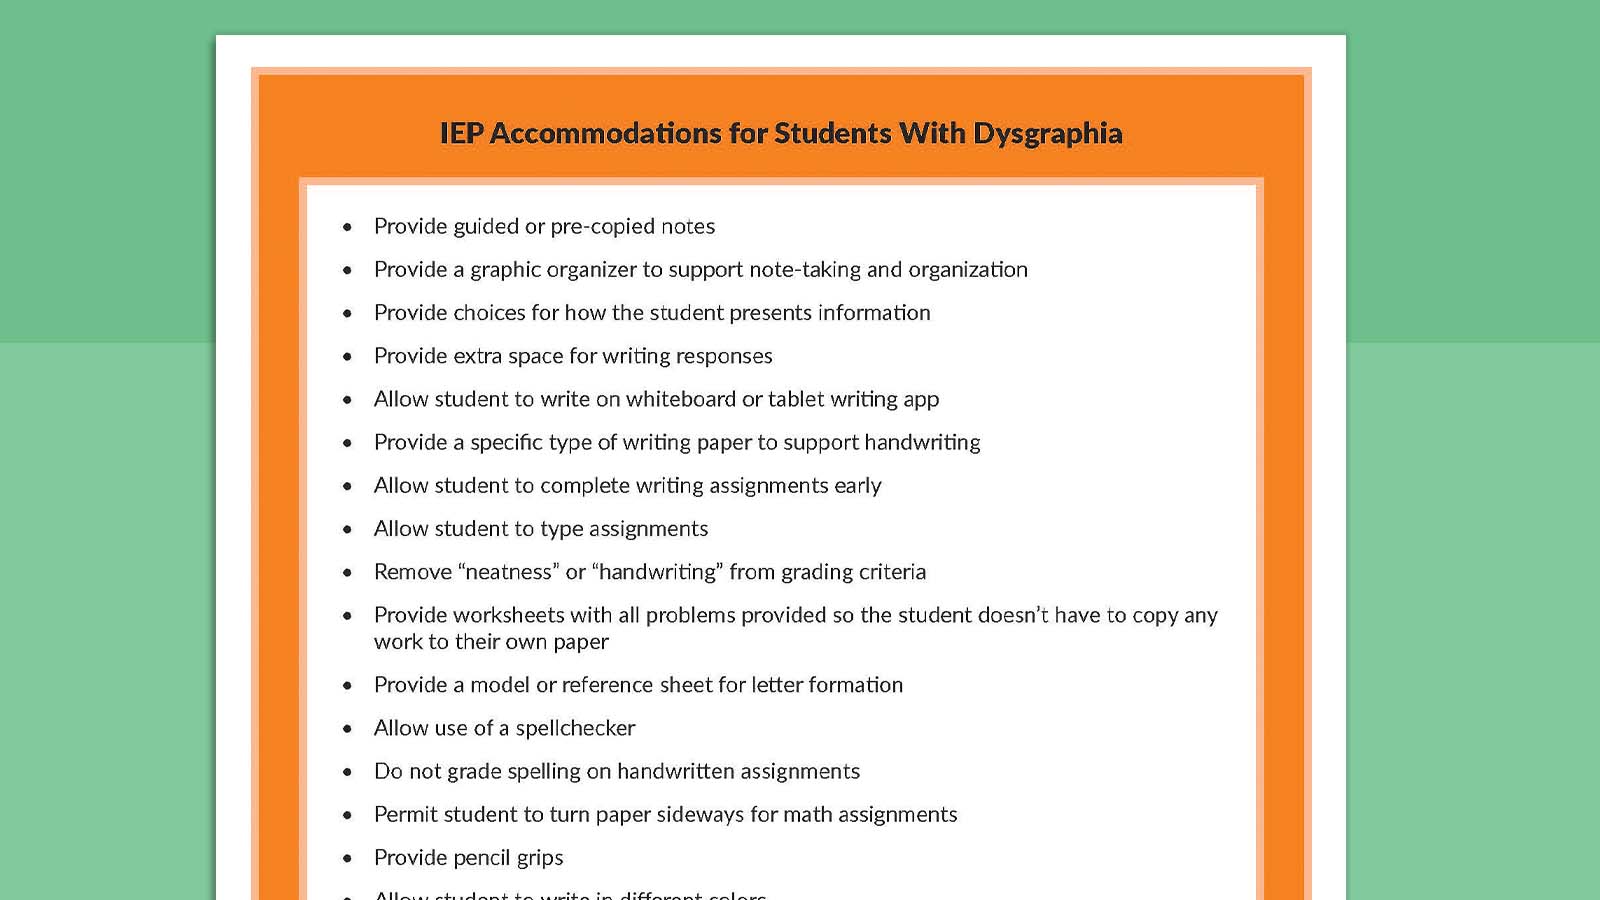 Printable sheet listing IEP accommodations for students with dysgraphia.